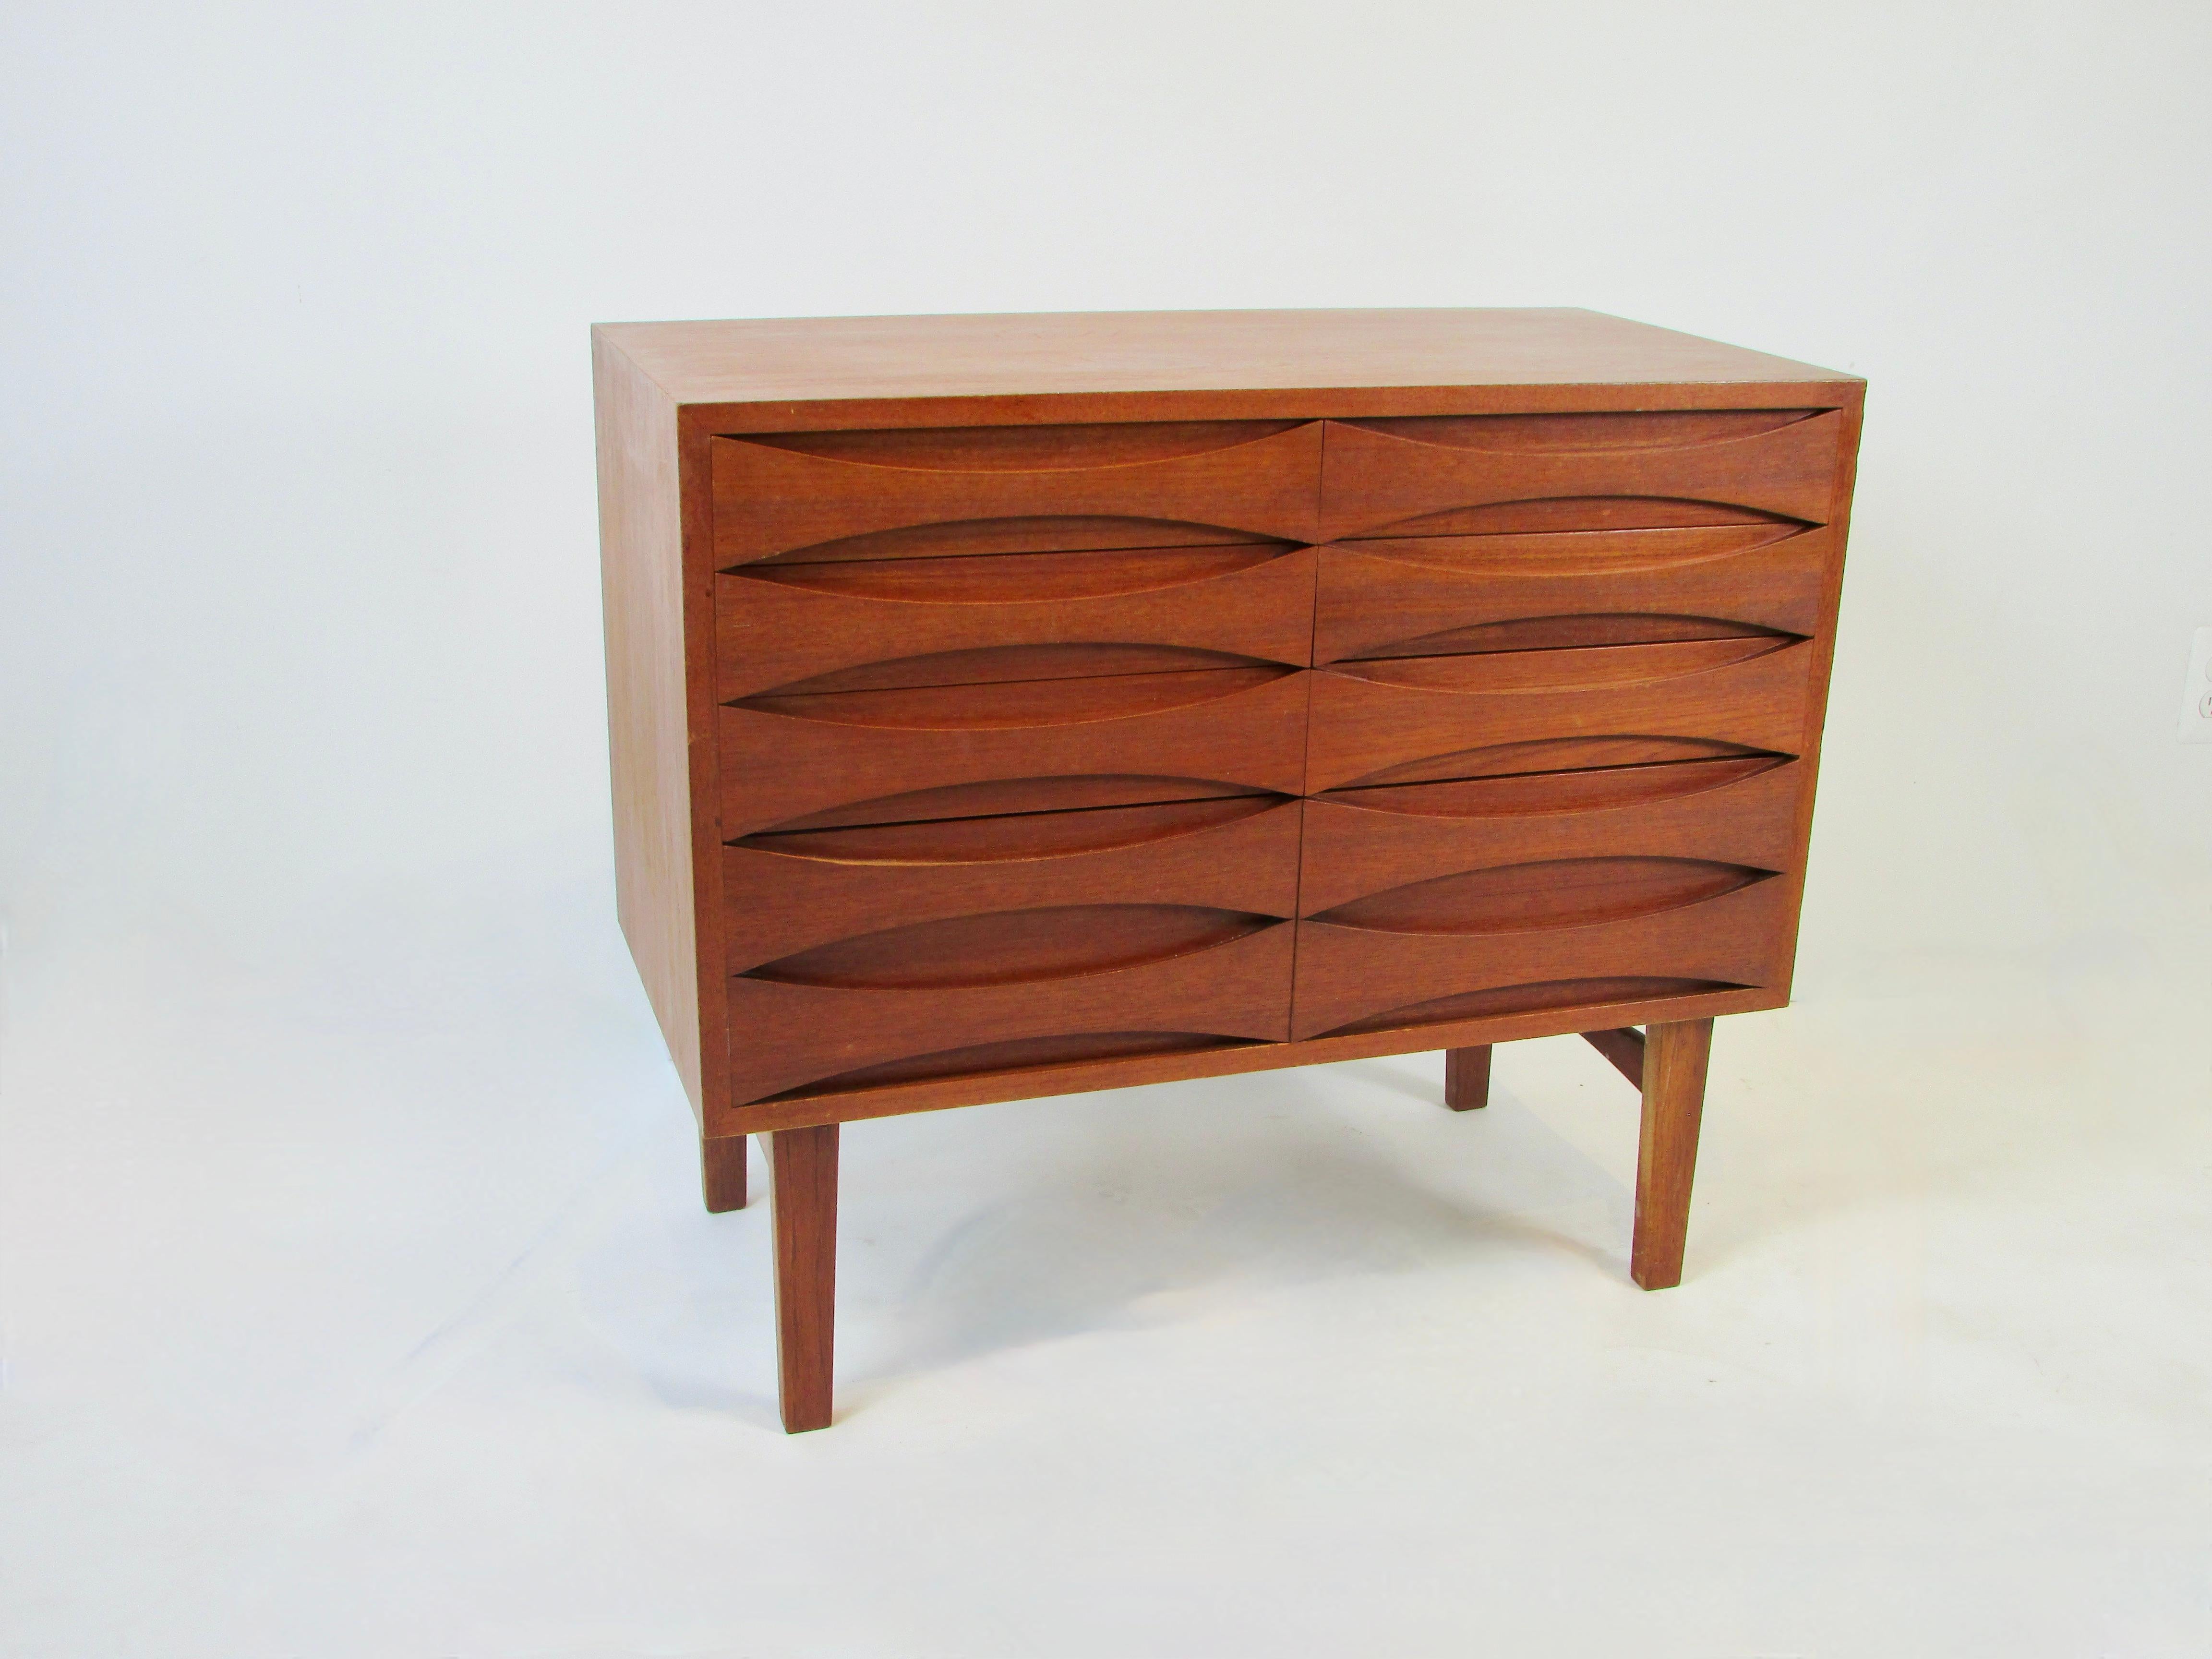 Nicely made Danish teak eight drawer chest Designed by Niels Clausen manufactured by Niels Clausen. Scalloped front drawers are of dove tail construction front and back. Hard to find smaller size cabinet.